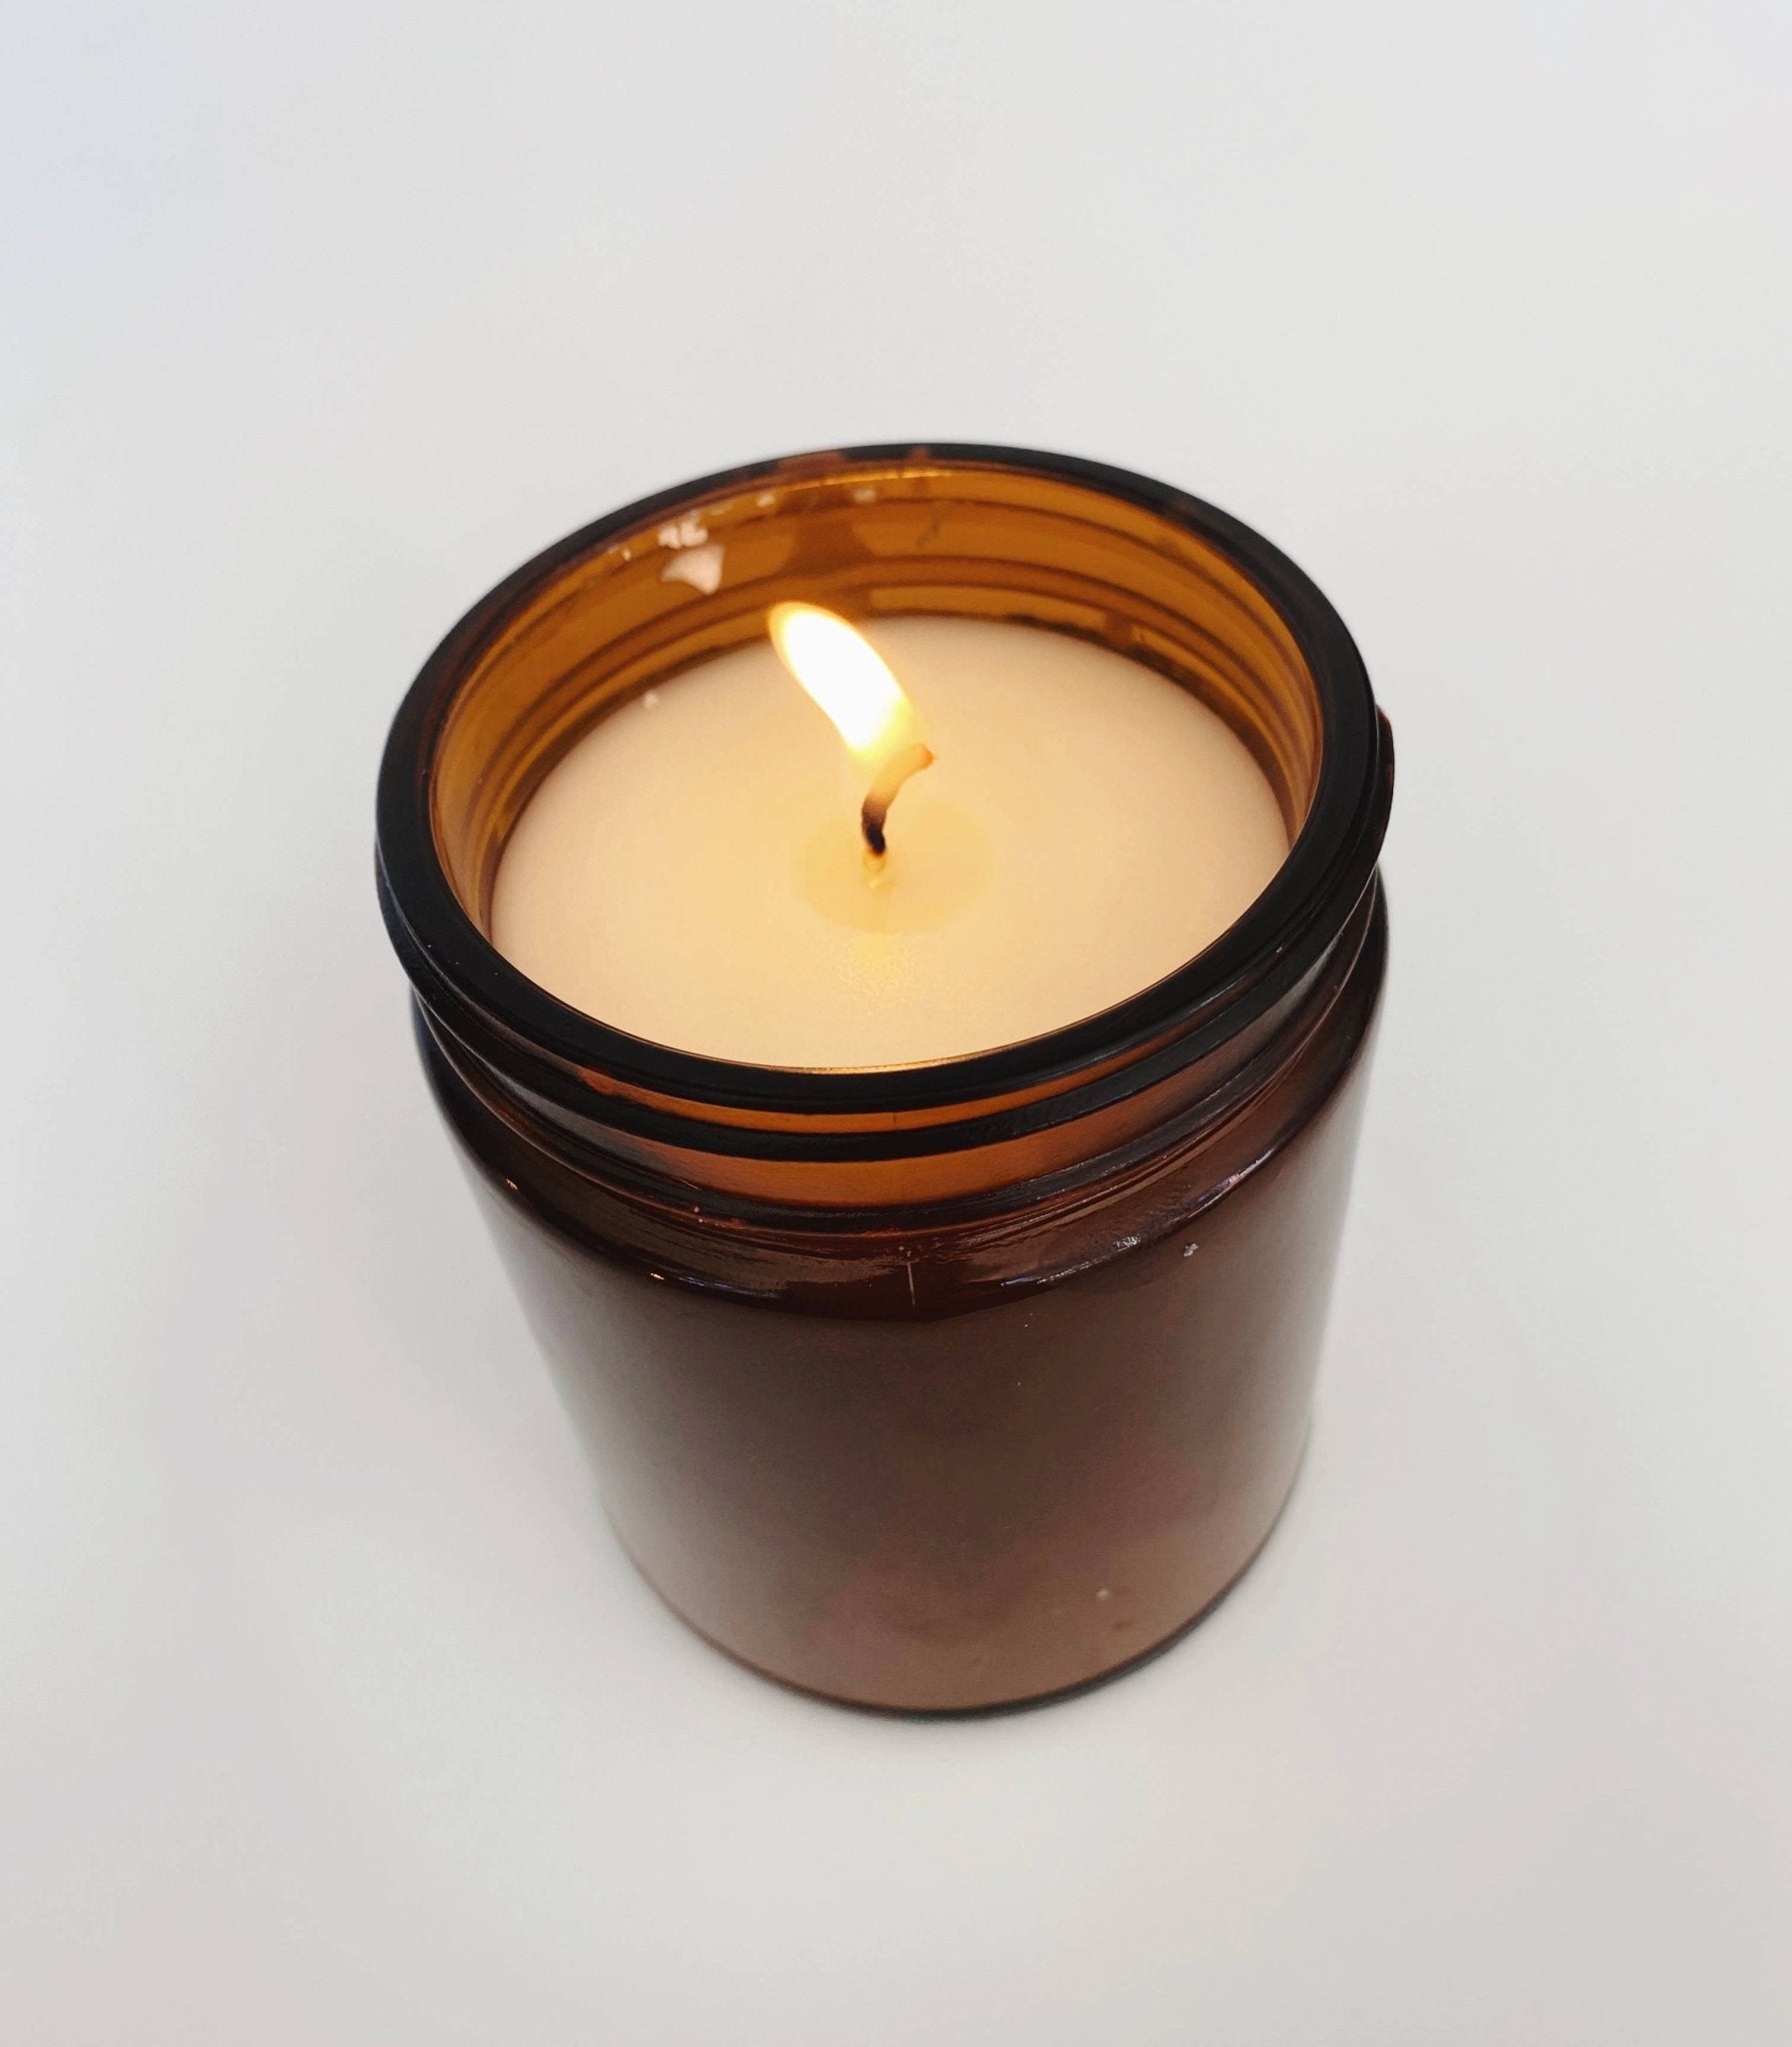 Merry & Bright Candle - Homeboxed